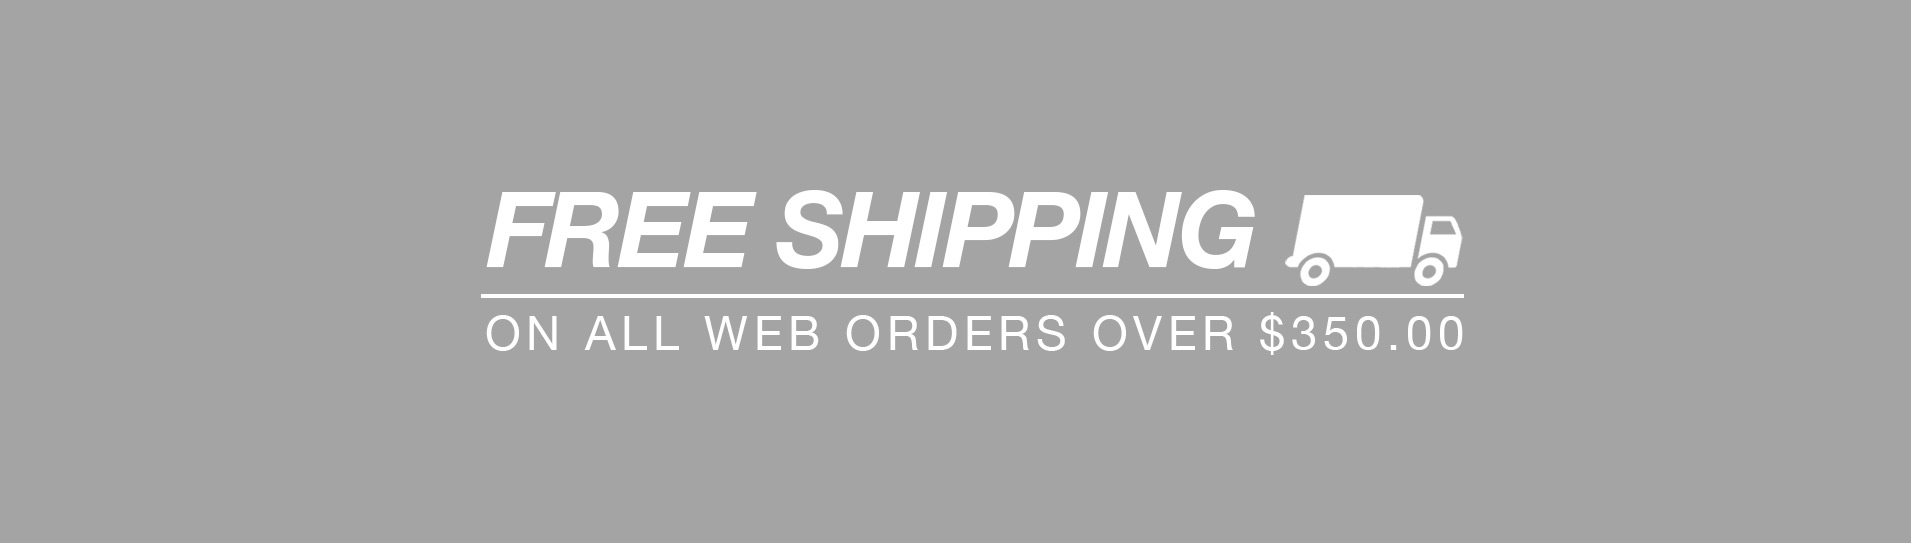 Free Shipping - On all web orders over $350